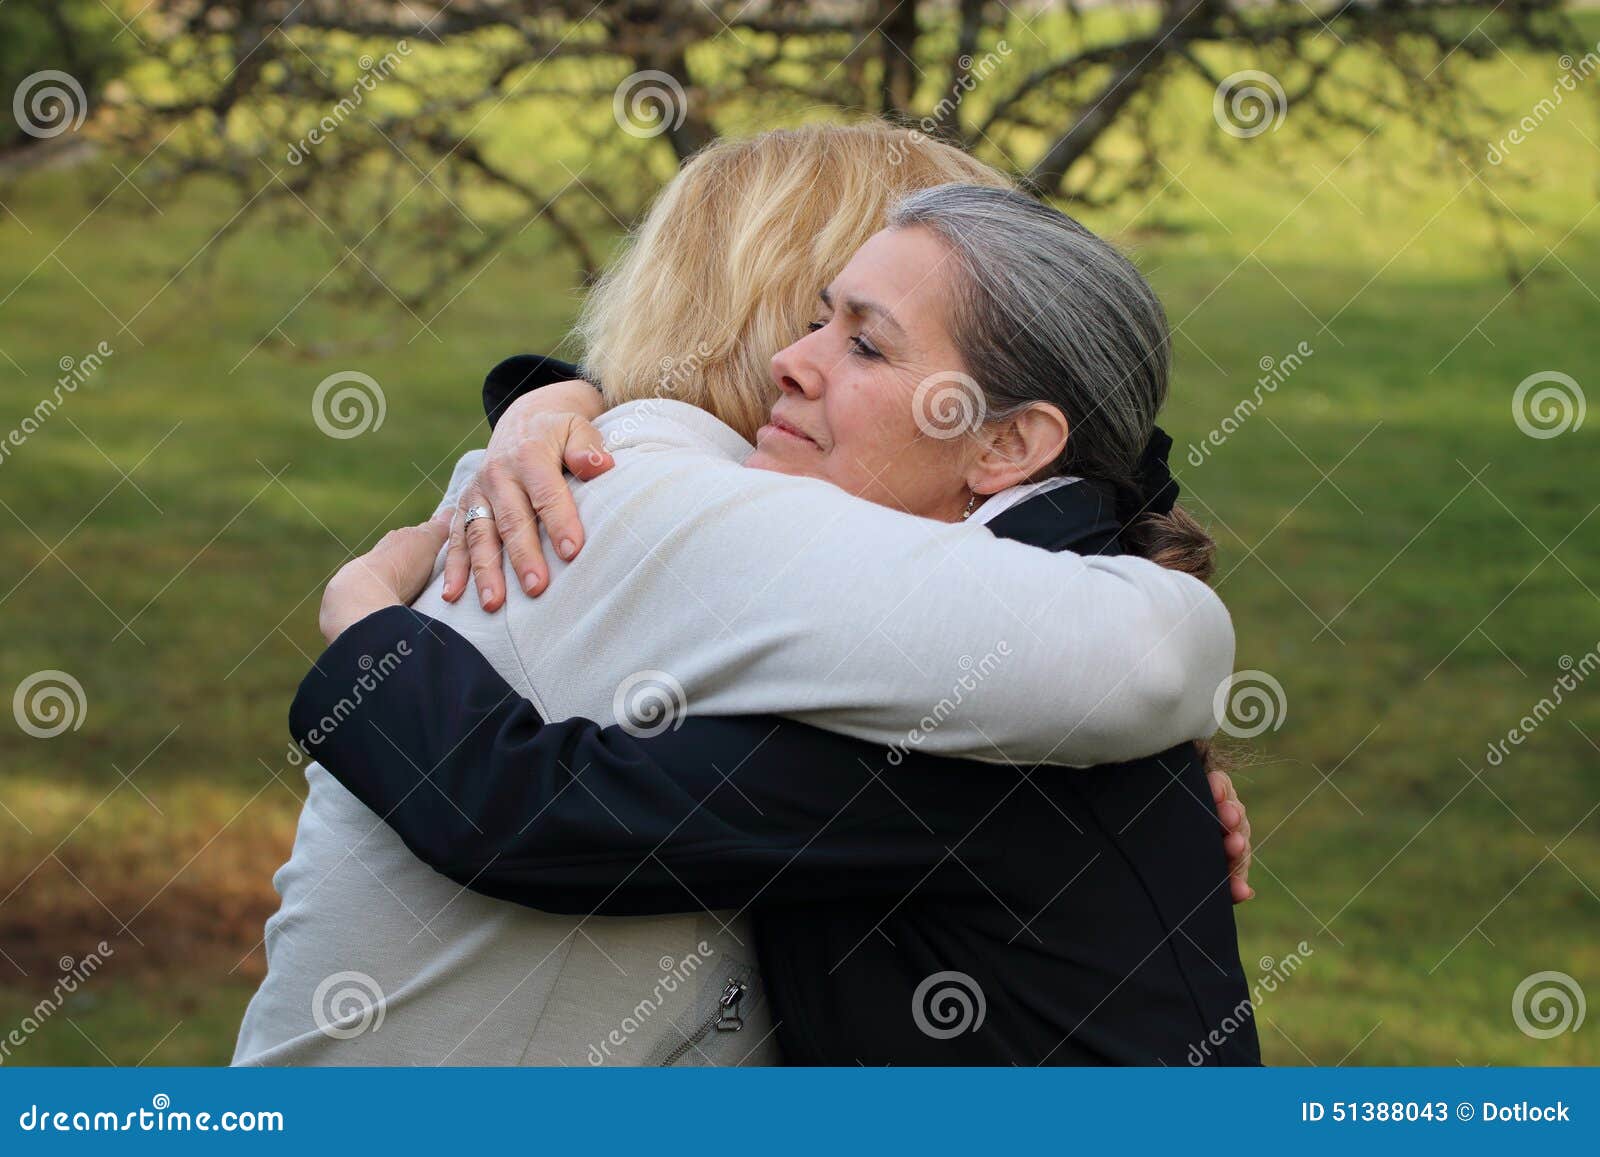 two mature friends hugging